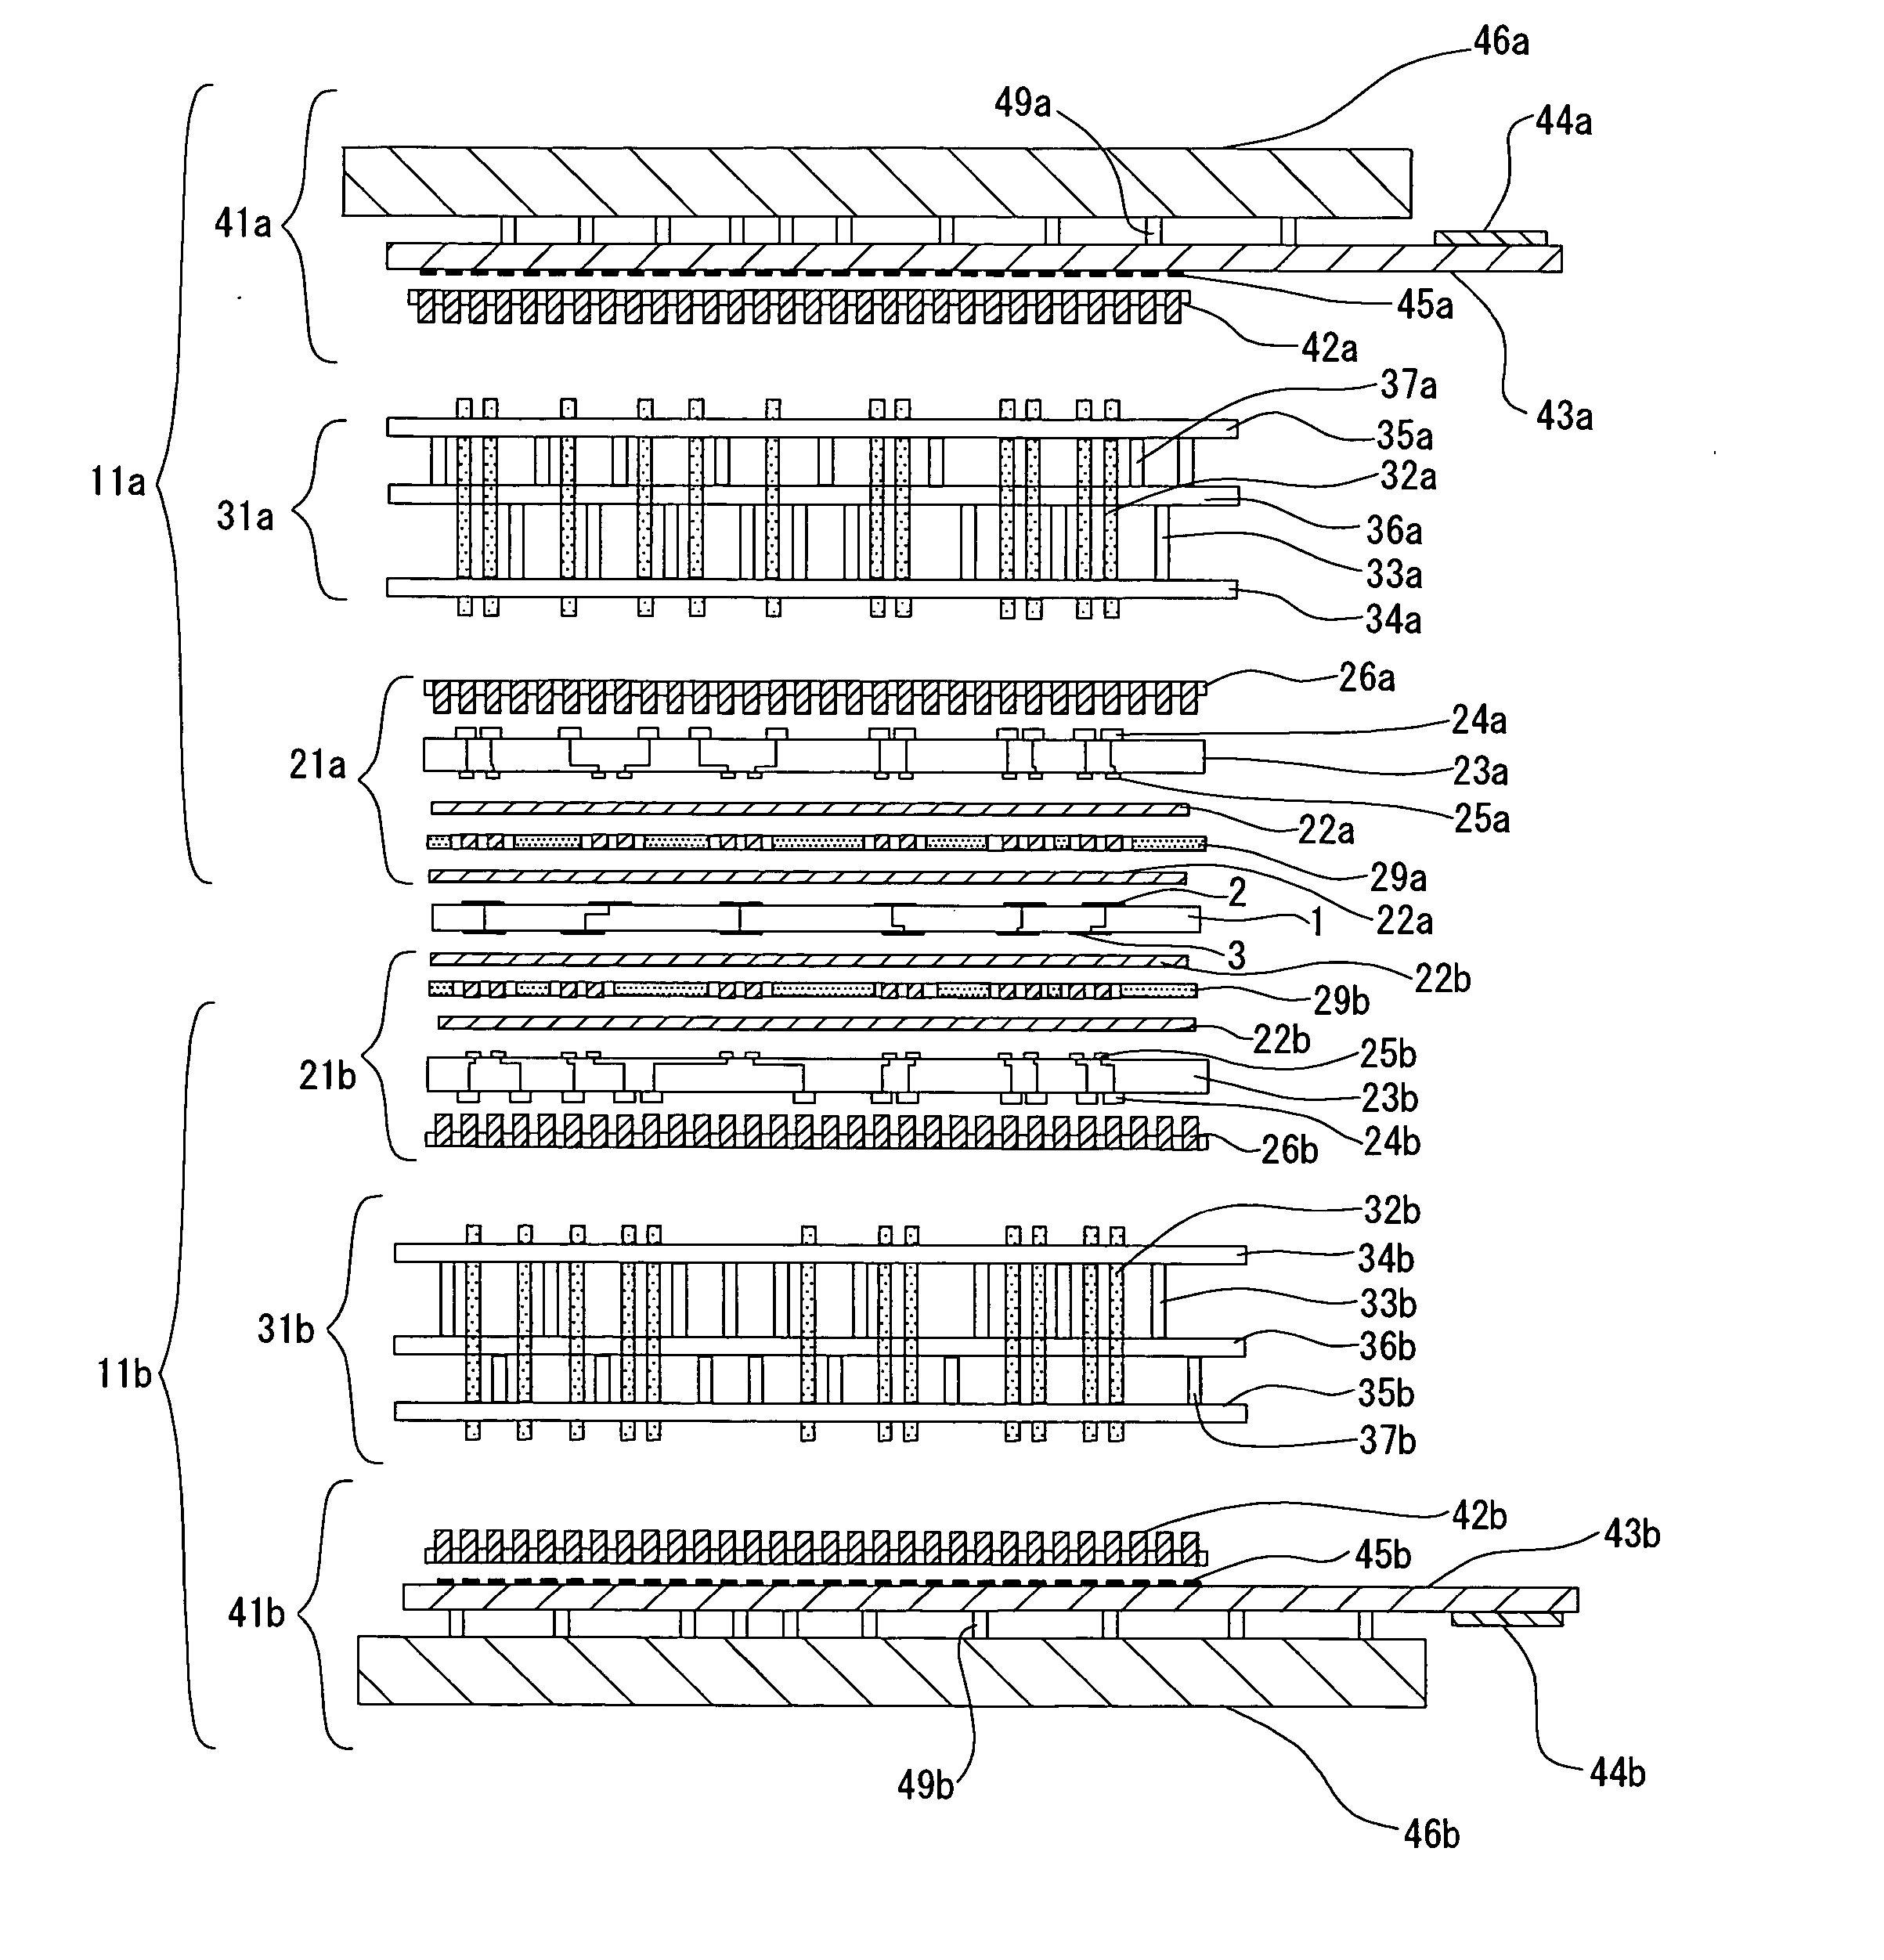 Inspection Equipment of Circuit Board and Inspection Method of Circuit Board